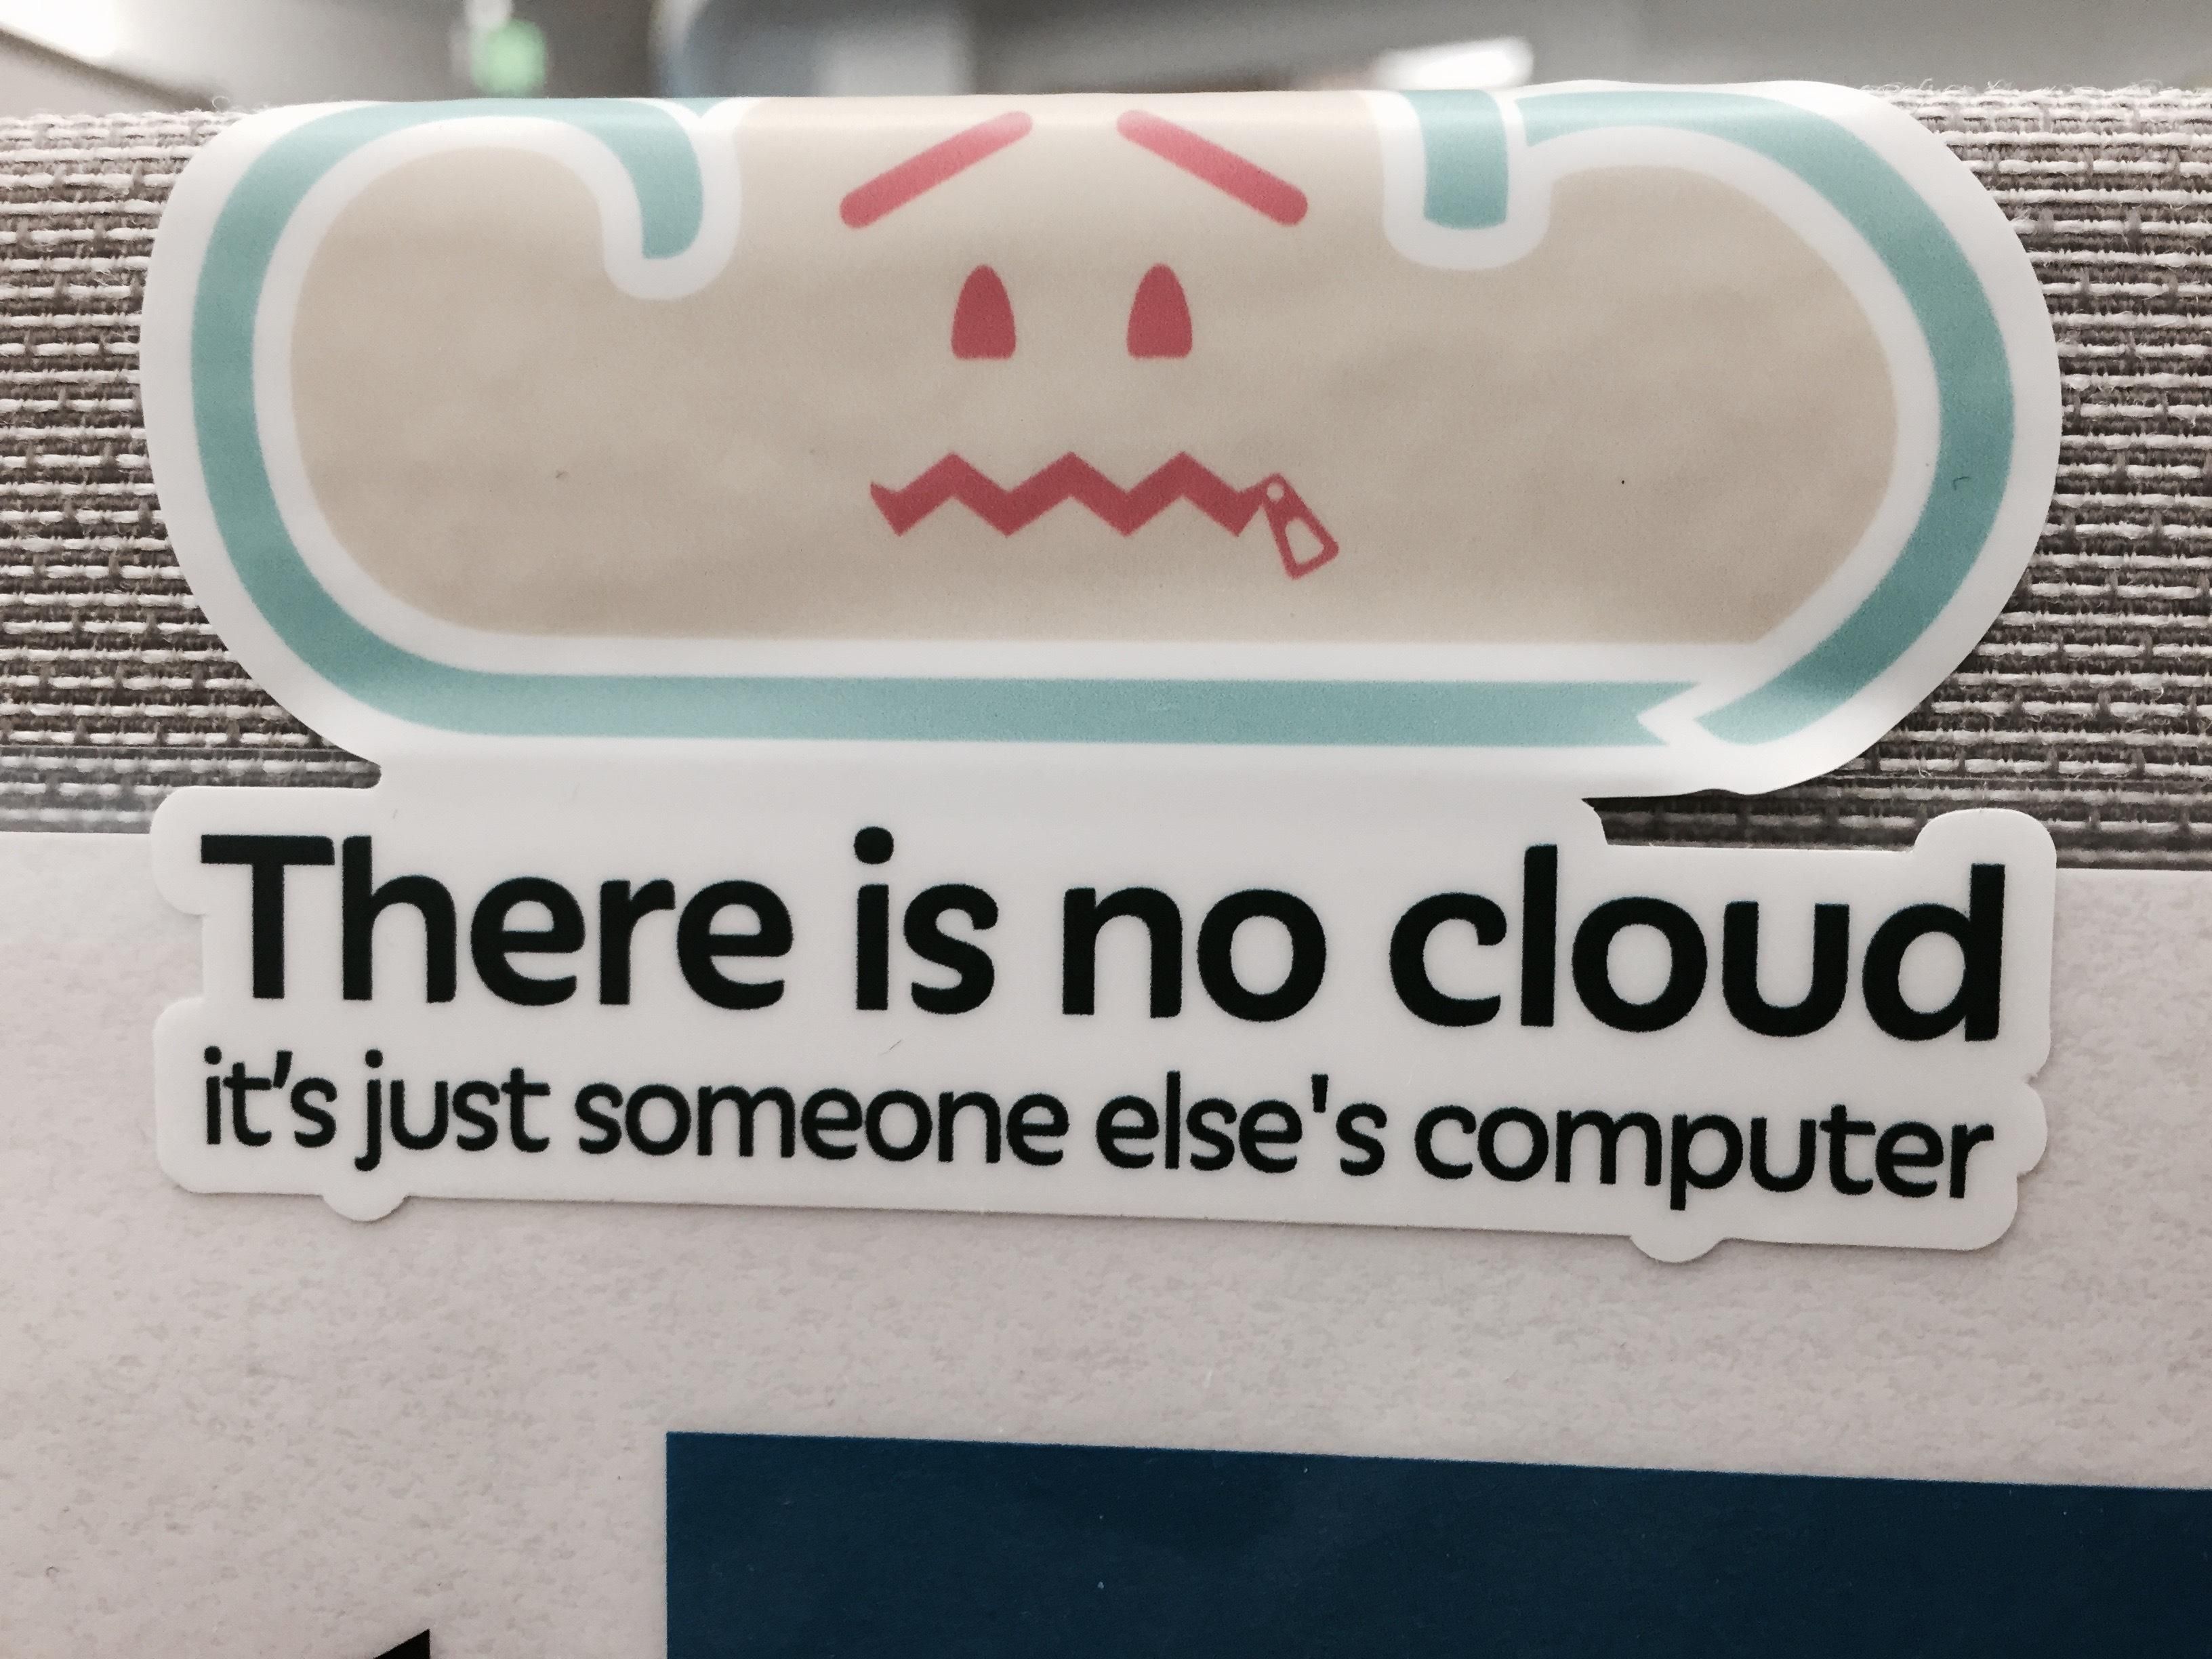 There is no cloud.